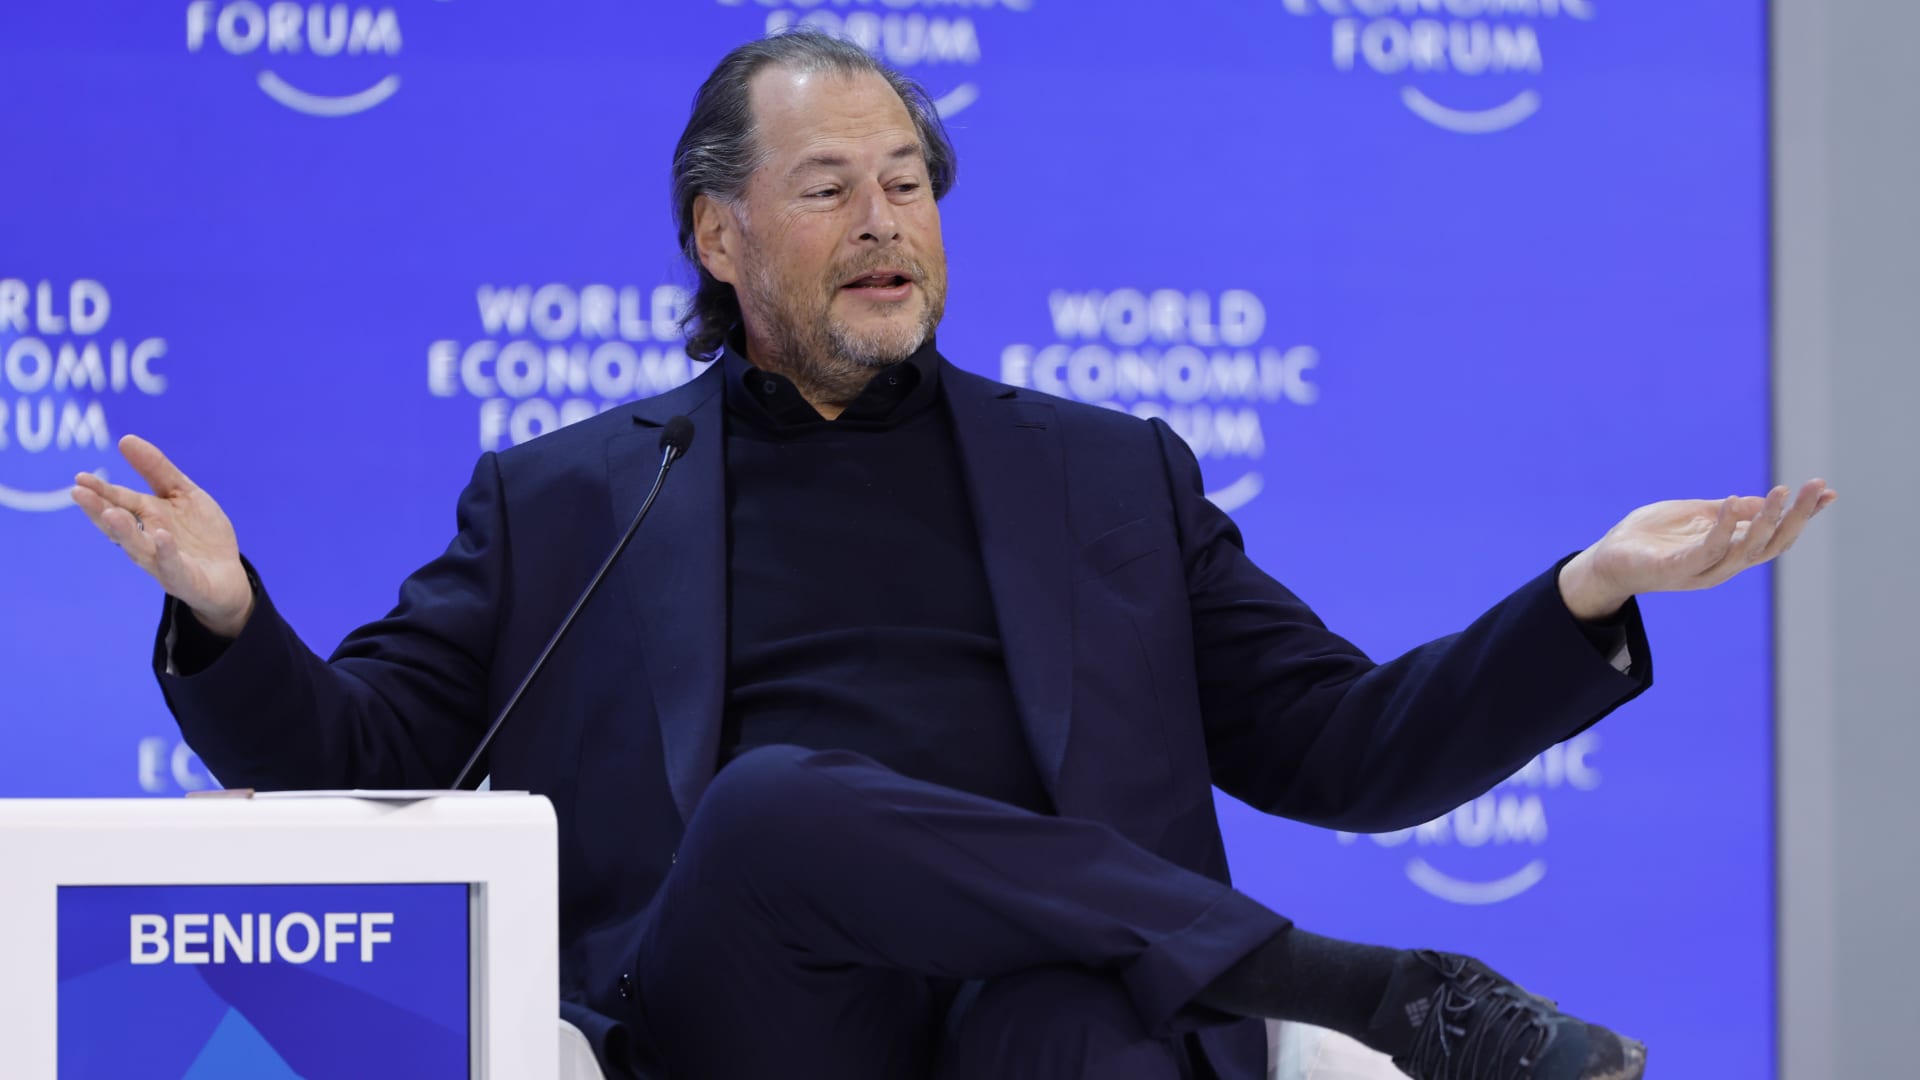 Salesforce slips after the company calls for single-digit full-year revenue growth